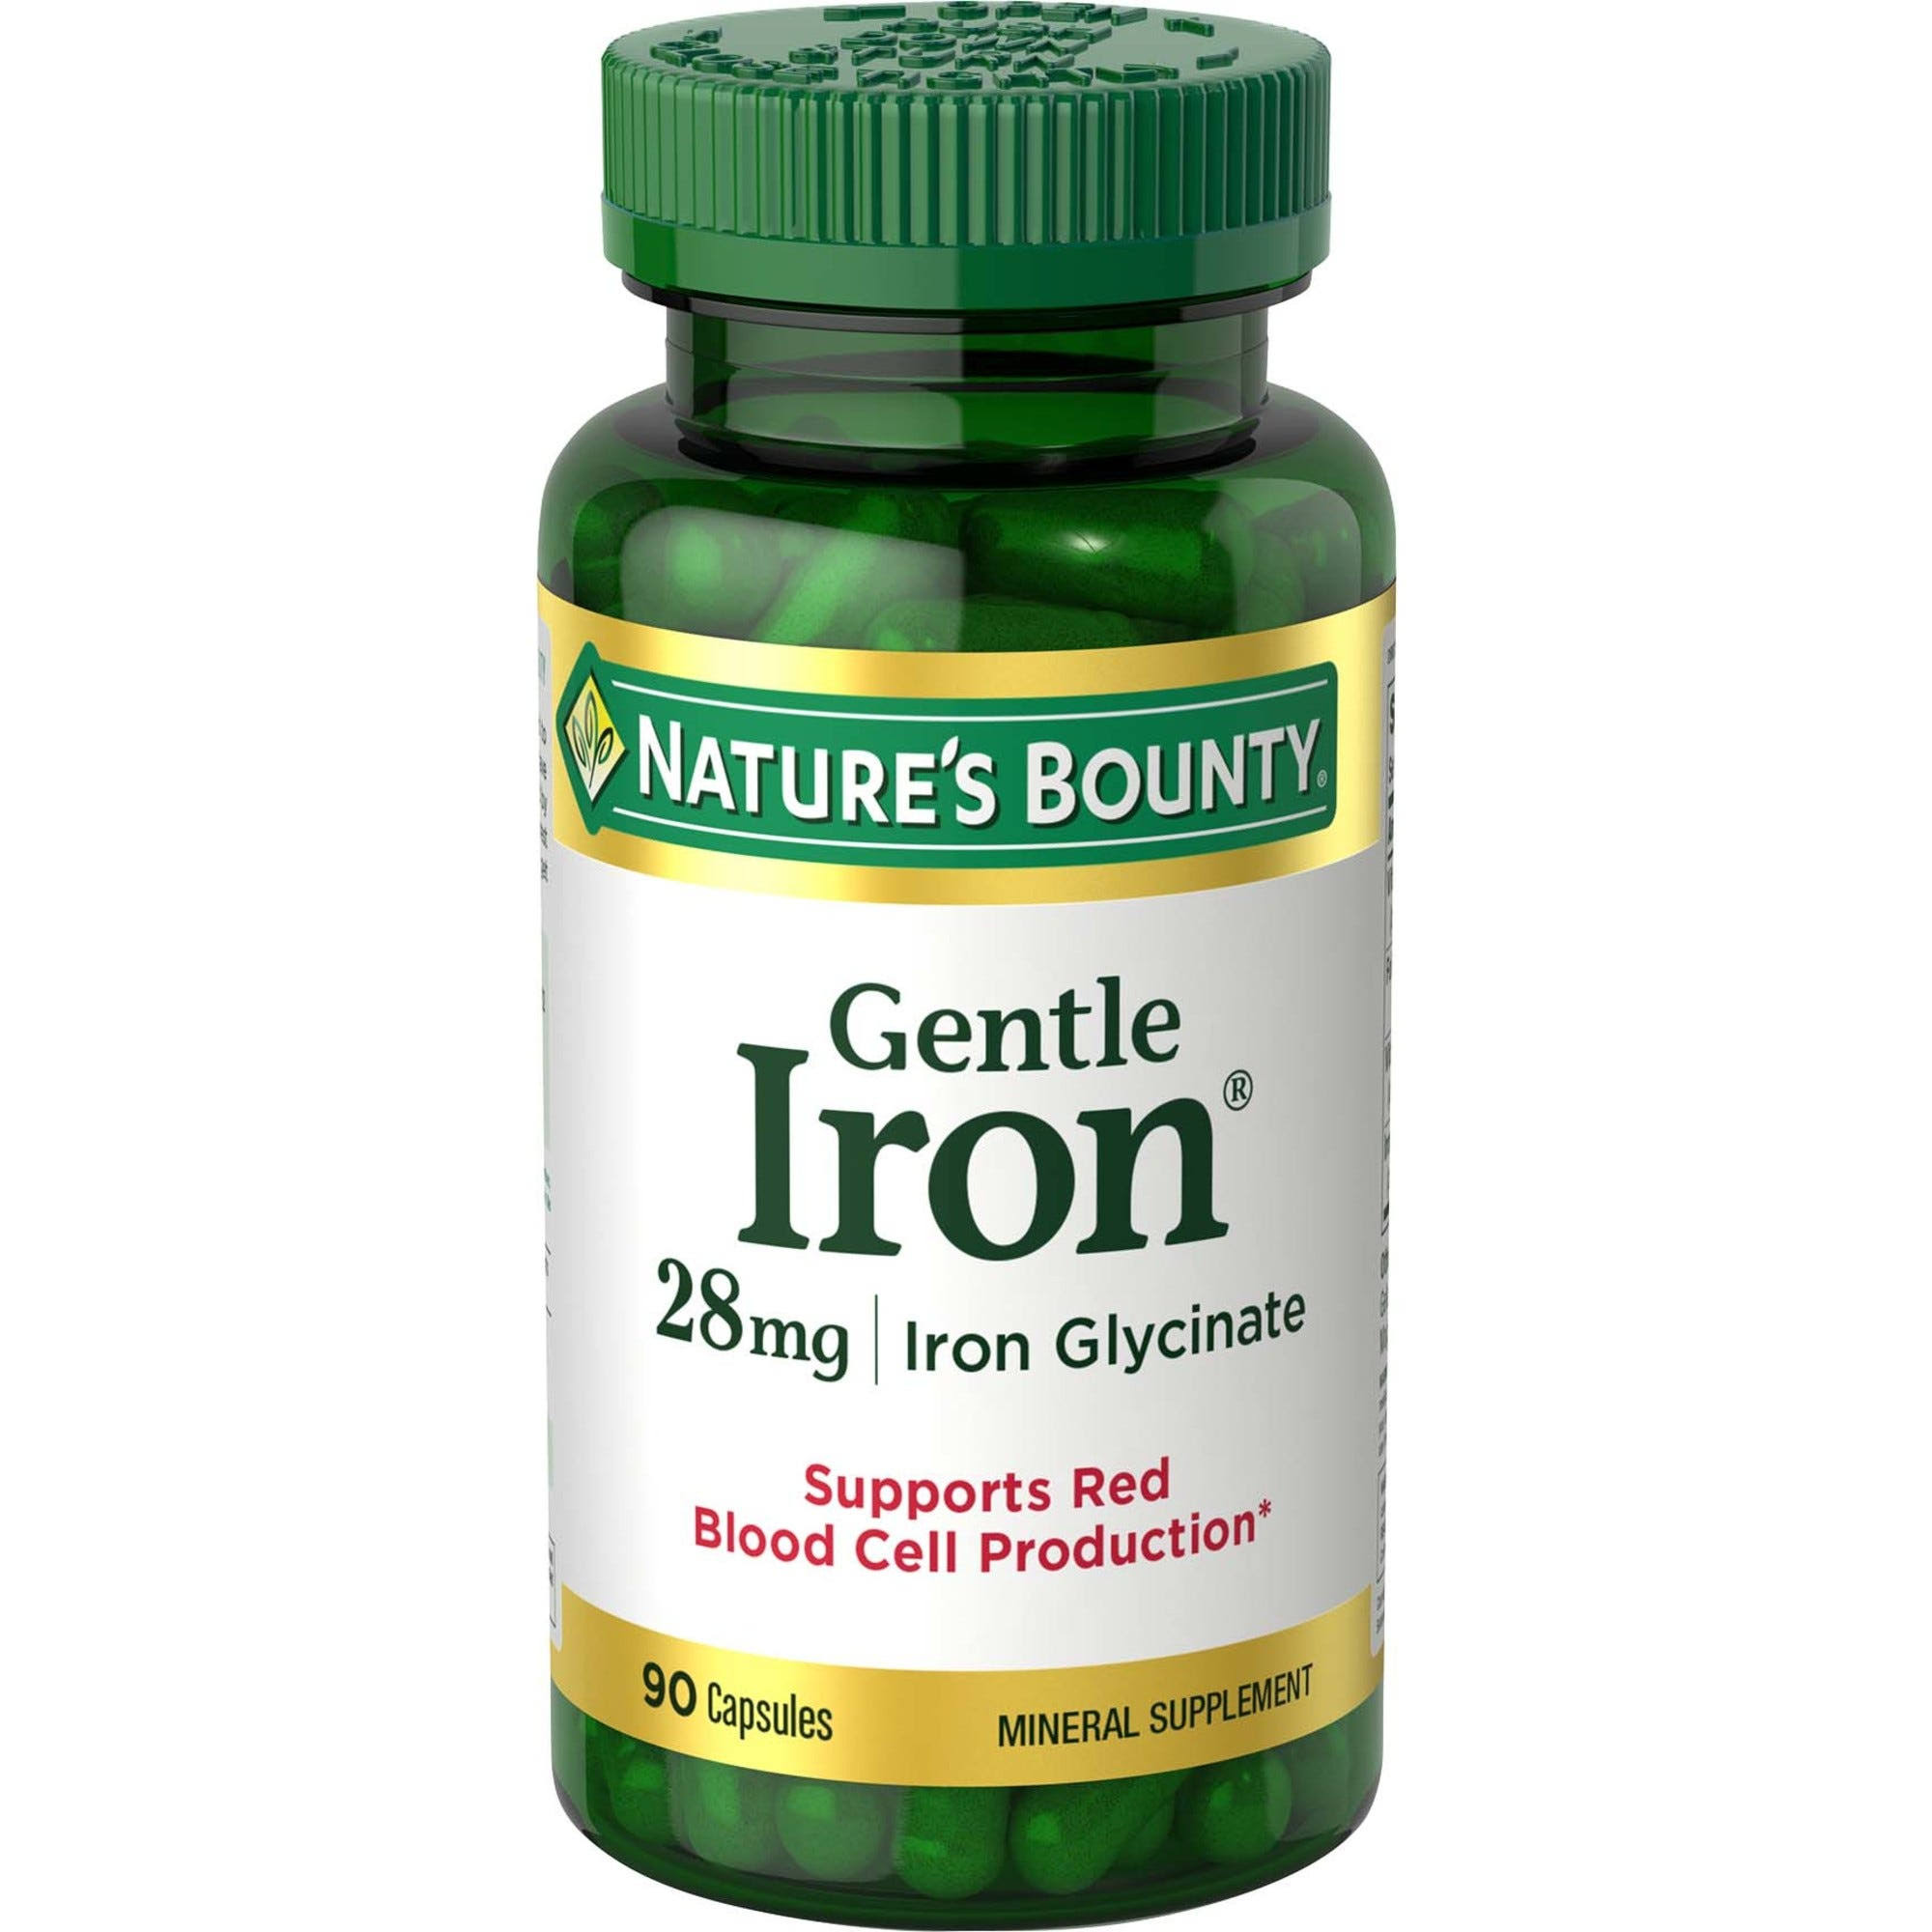 Nature's Bounty Gentle Iron Glycinate Capsules Dietary Supplement - 28mg, 90 Pack